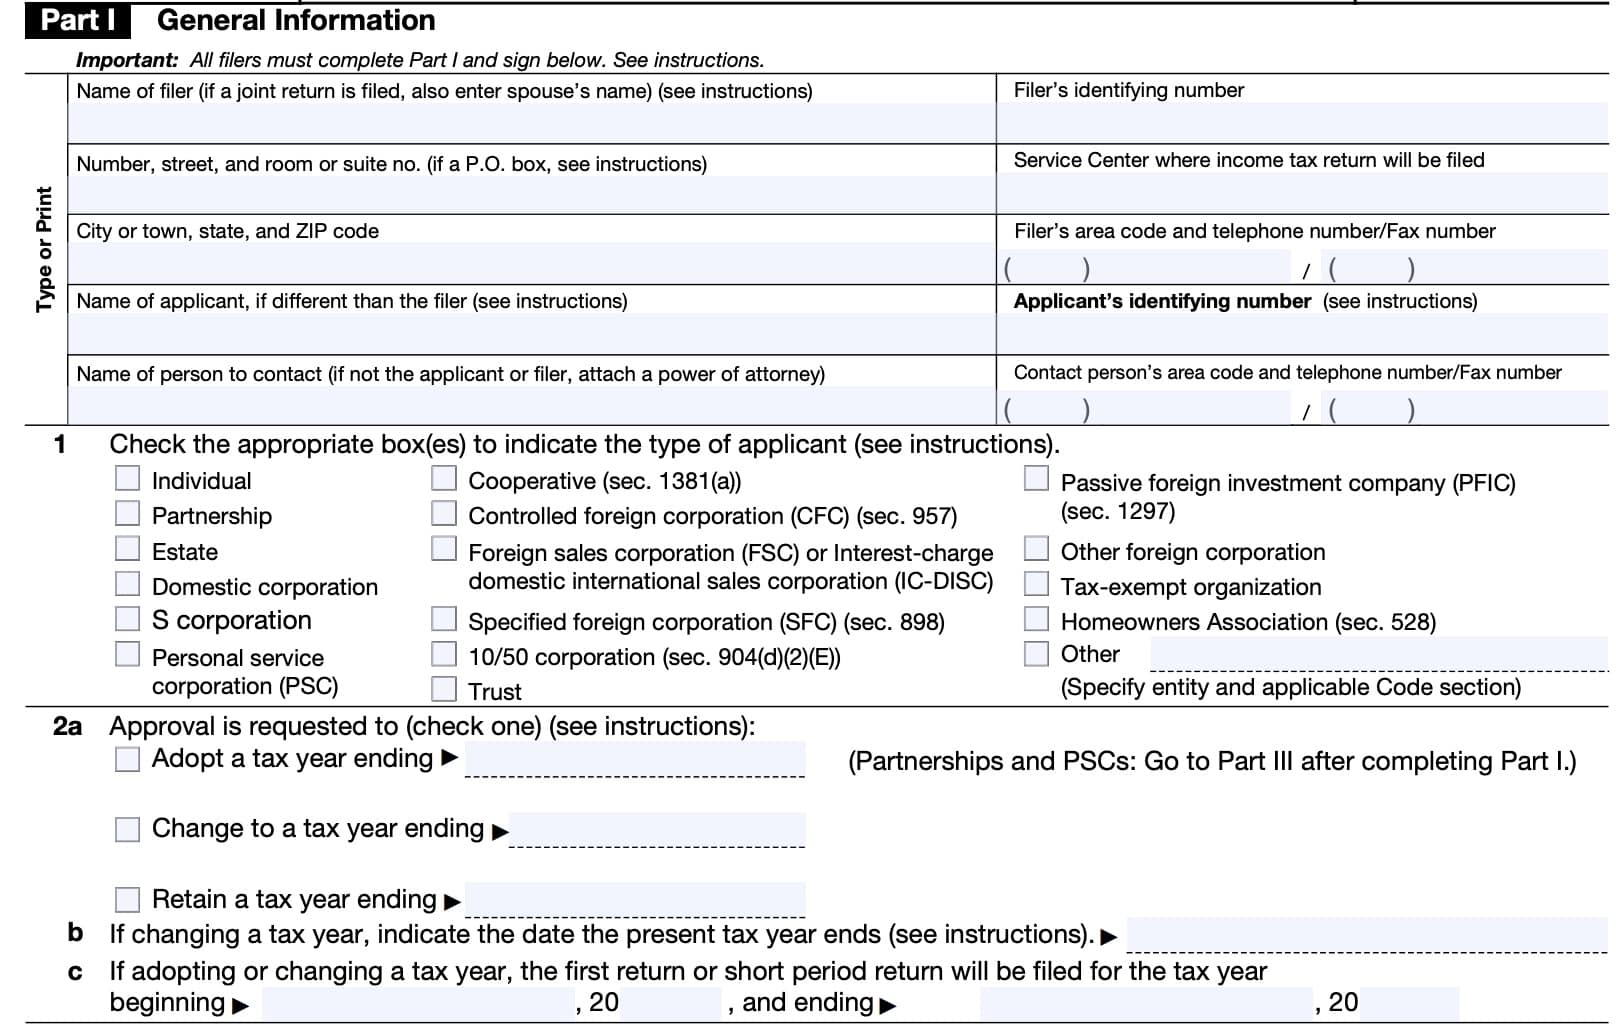 irs form 1128, part i, general information